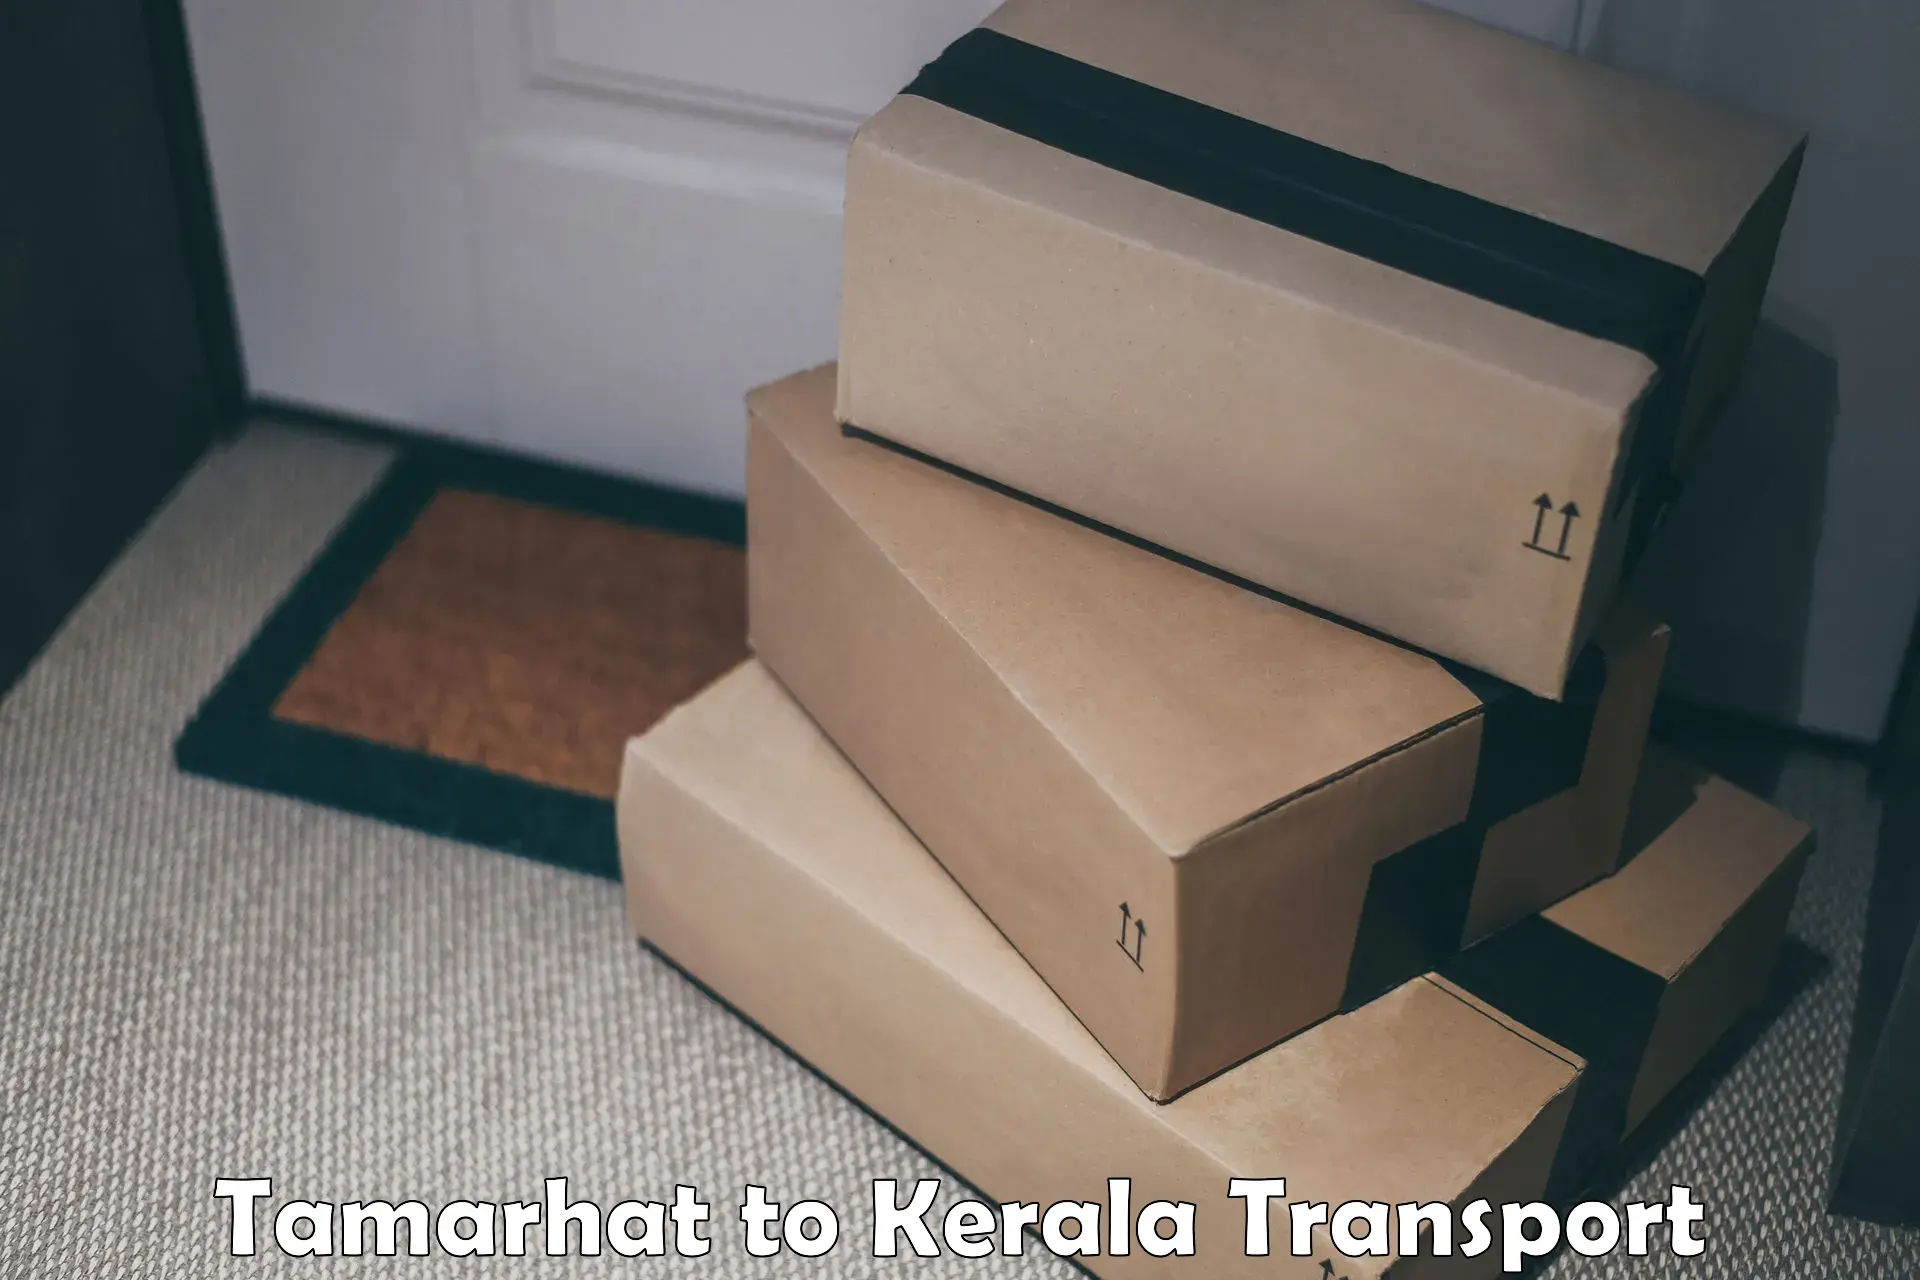 Air freight transport services Tamarhat to Cochin Port Kochi